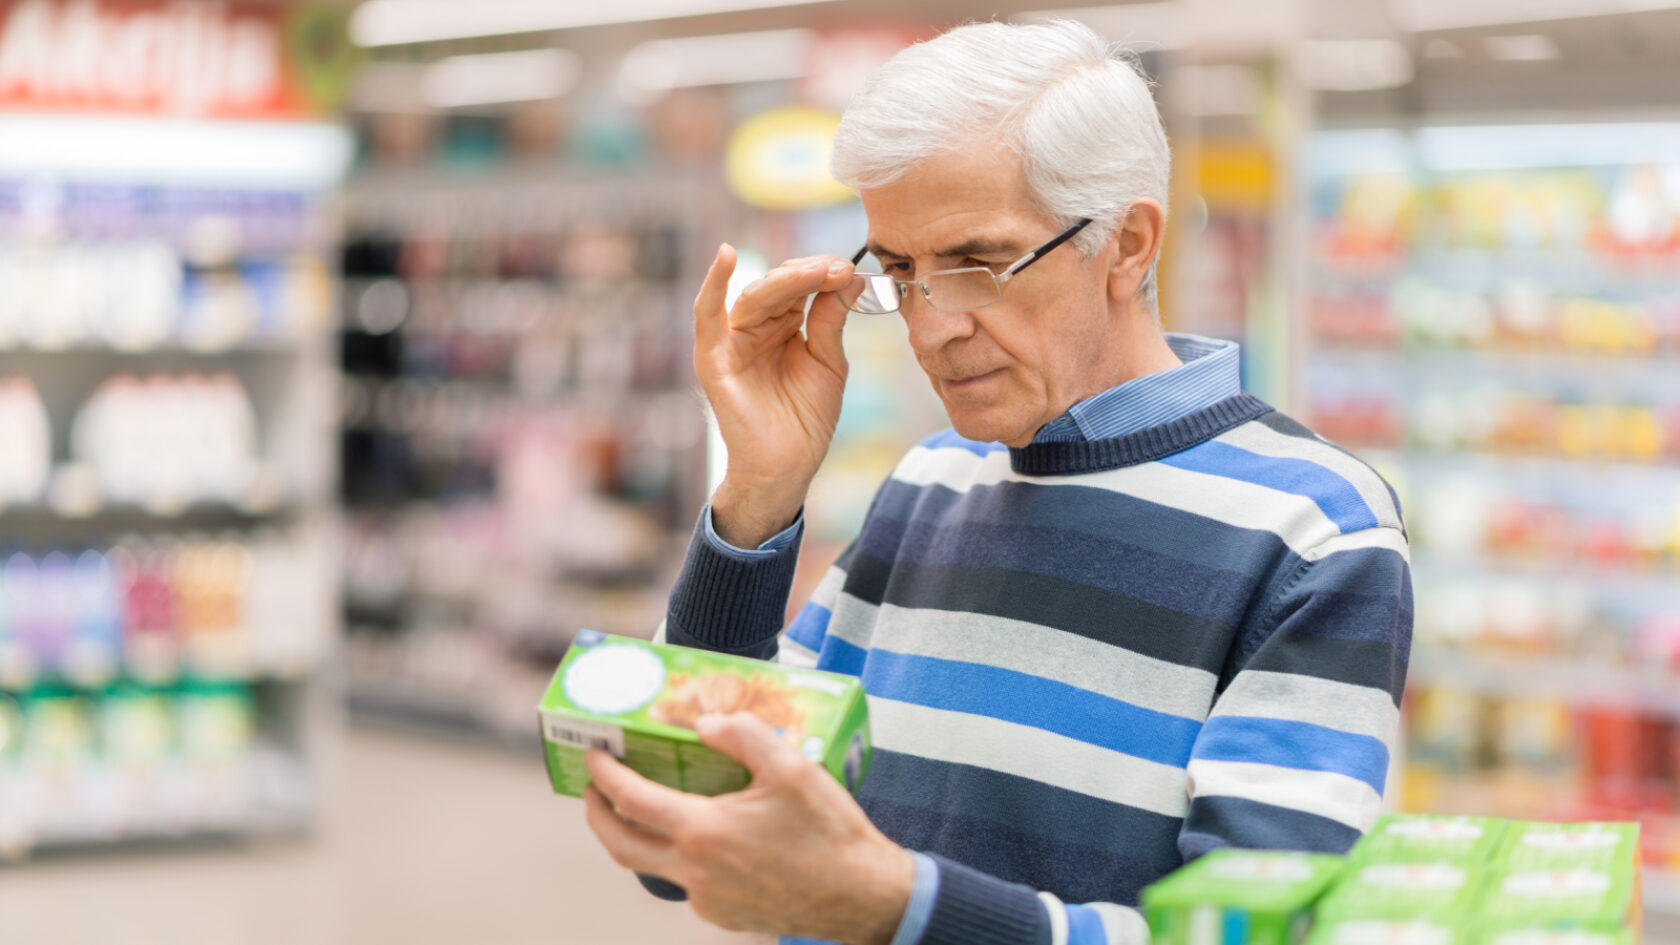 A man reviews the nutrition facts on a product in the supermarket.